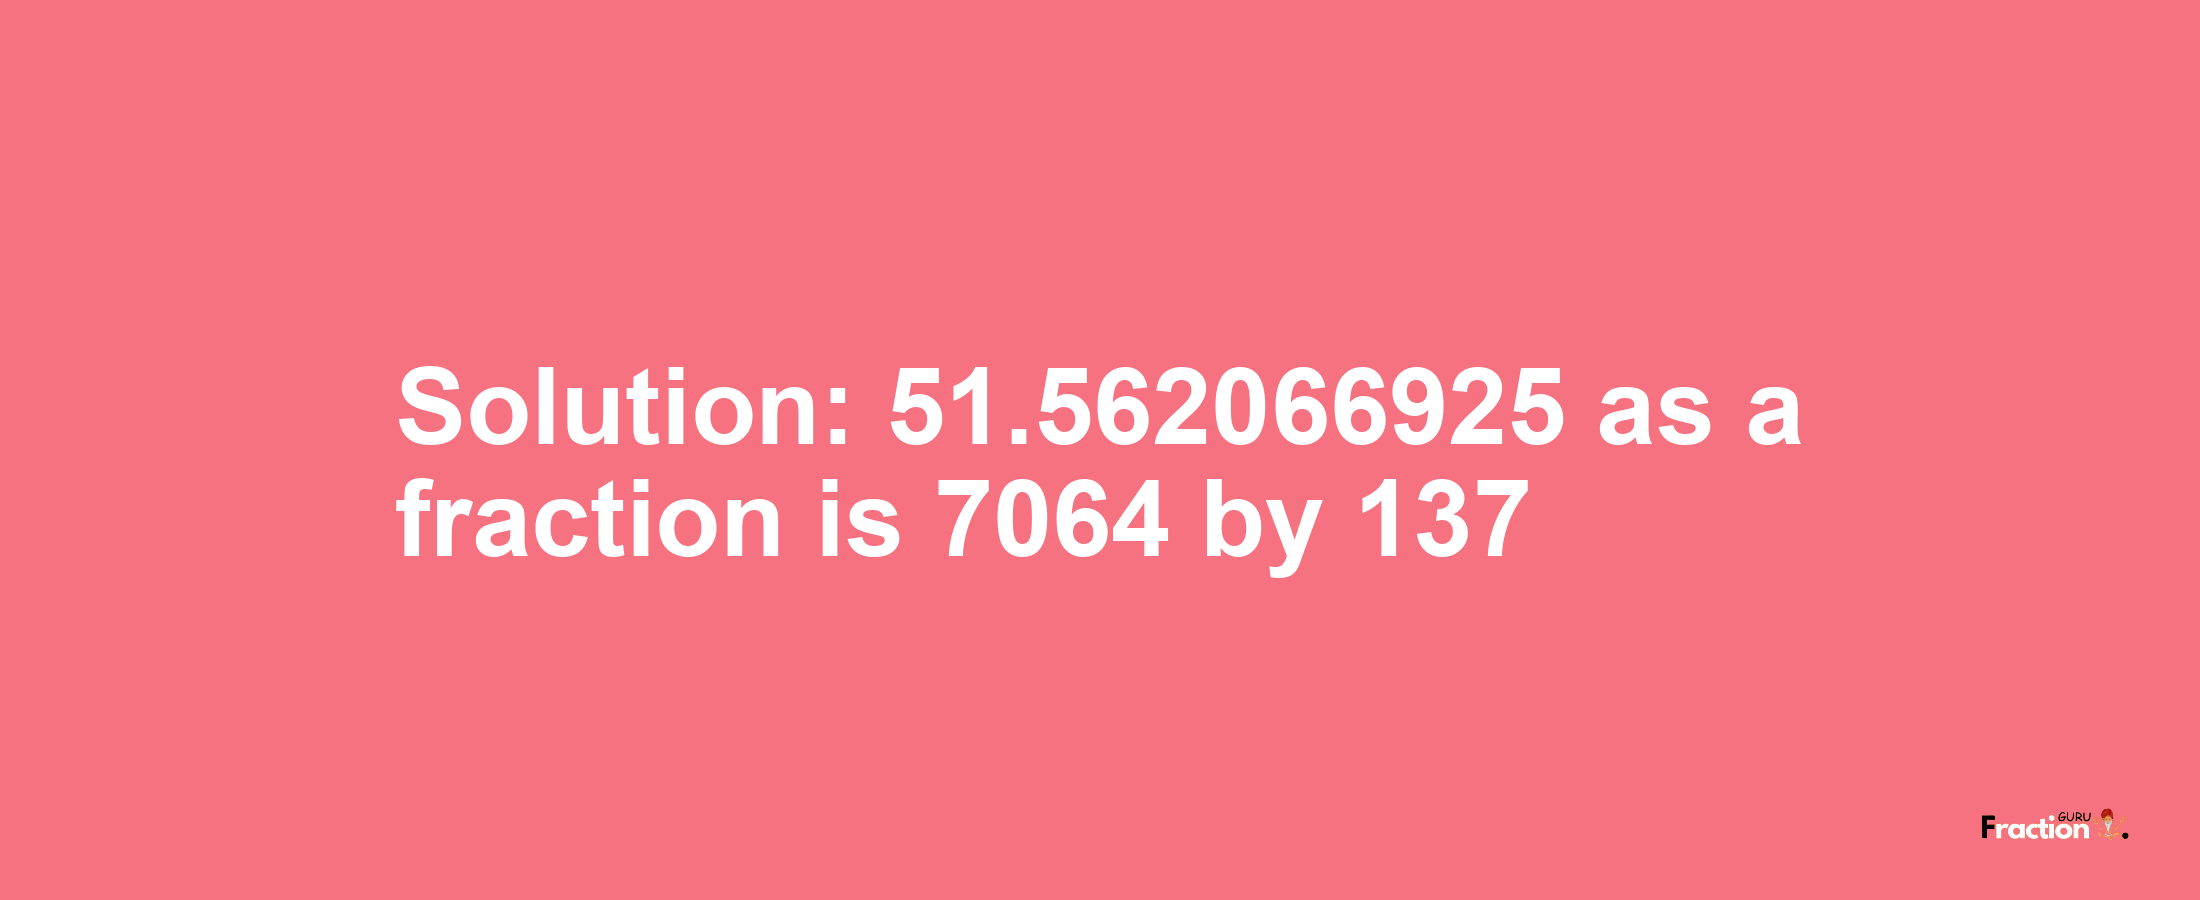 Solution:51.562066925 as a fraction is 7064/137